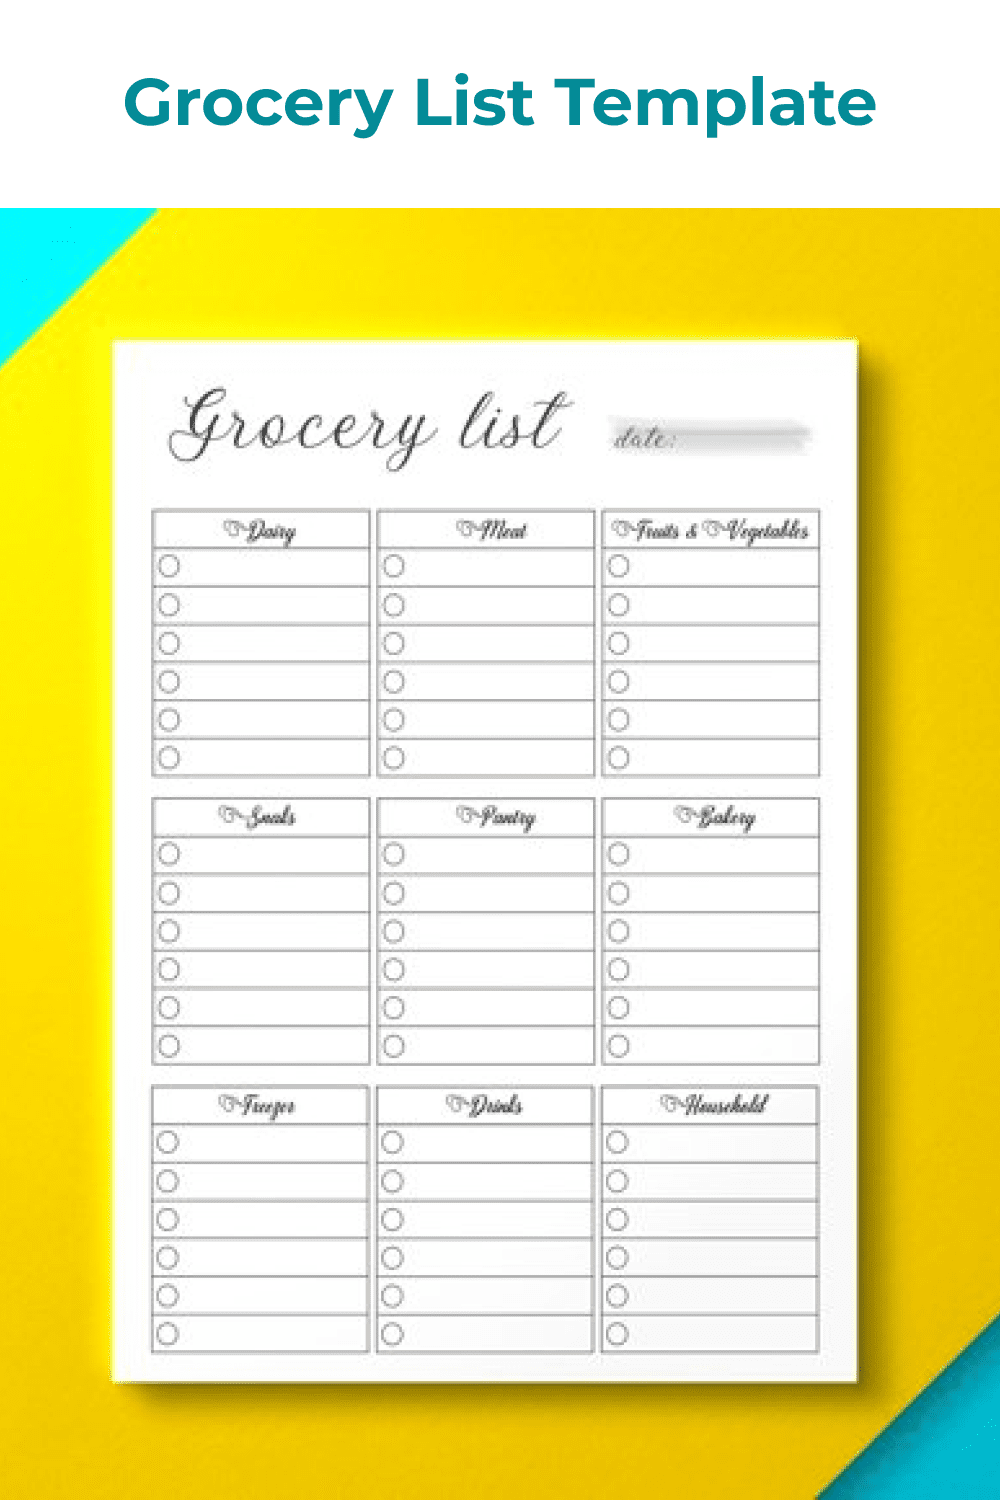 Daily meal planner with yellow backing.